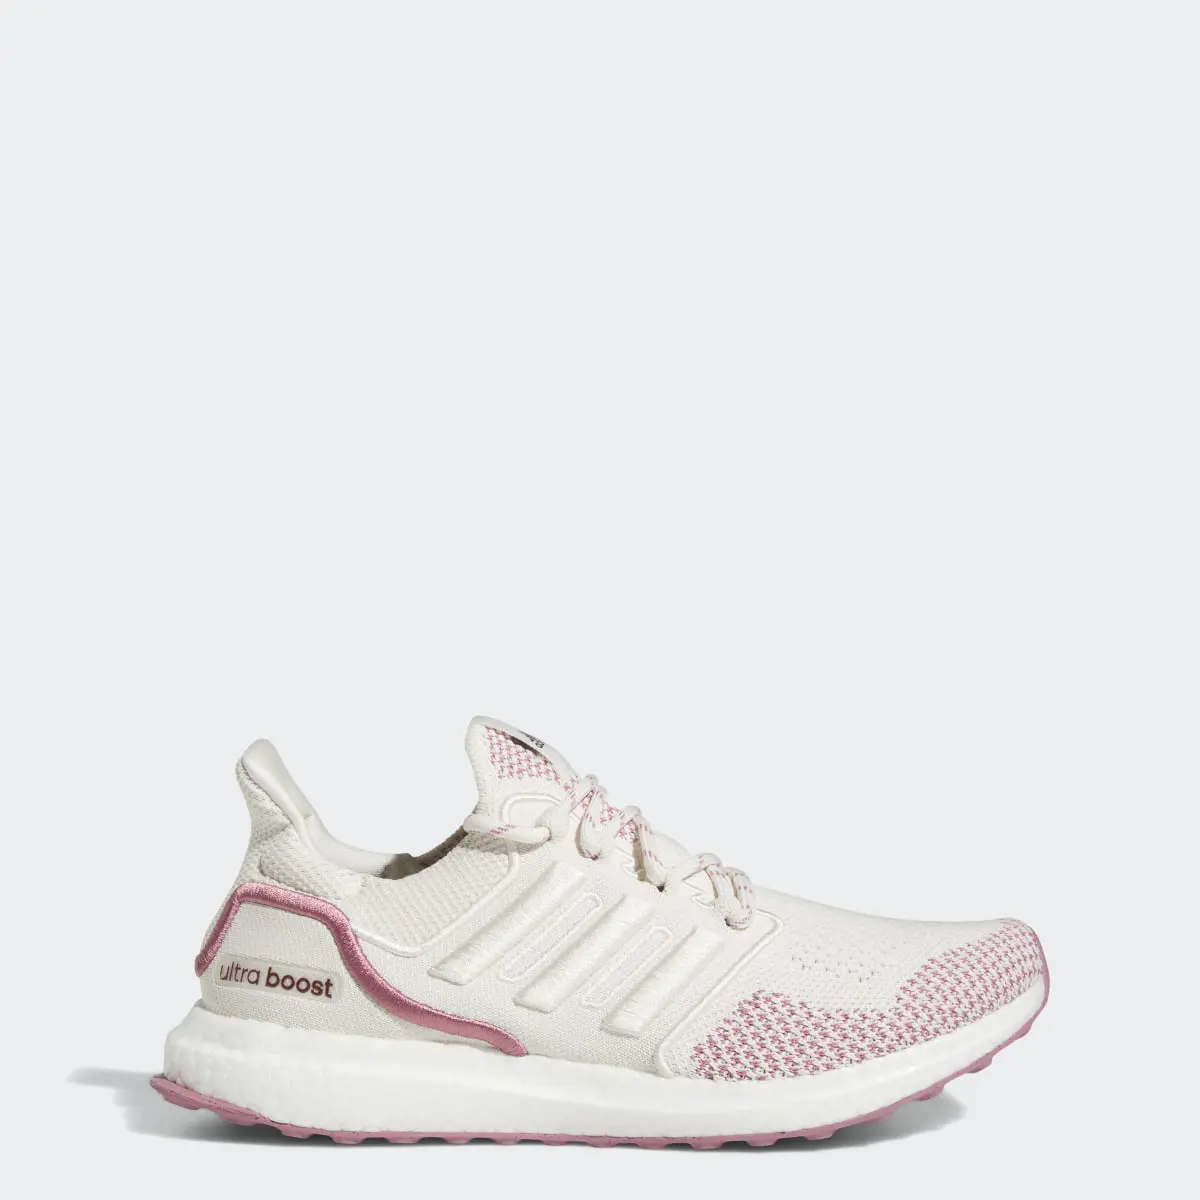 Adidas Ultraboost 1 LCFP Shoes. 1